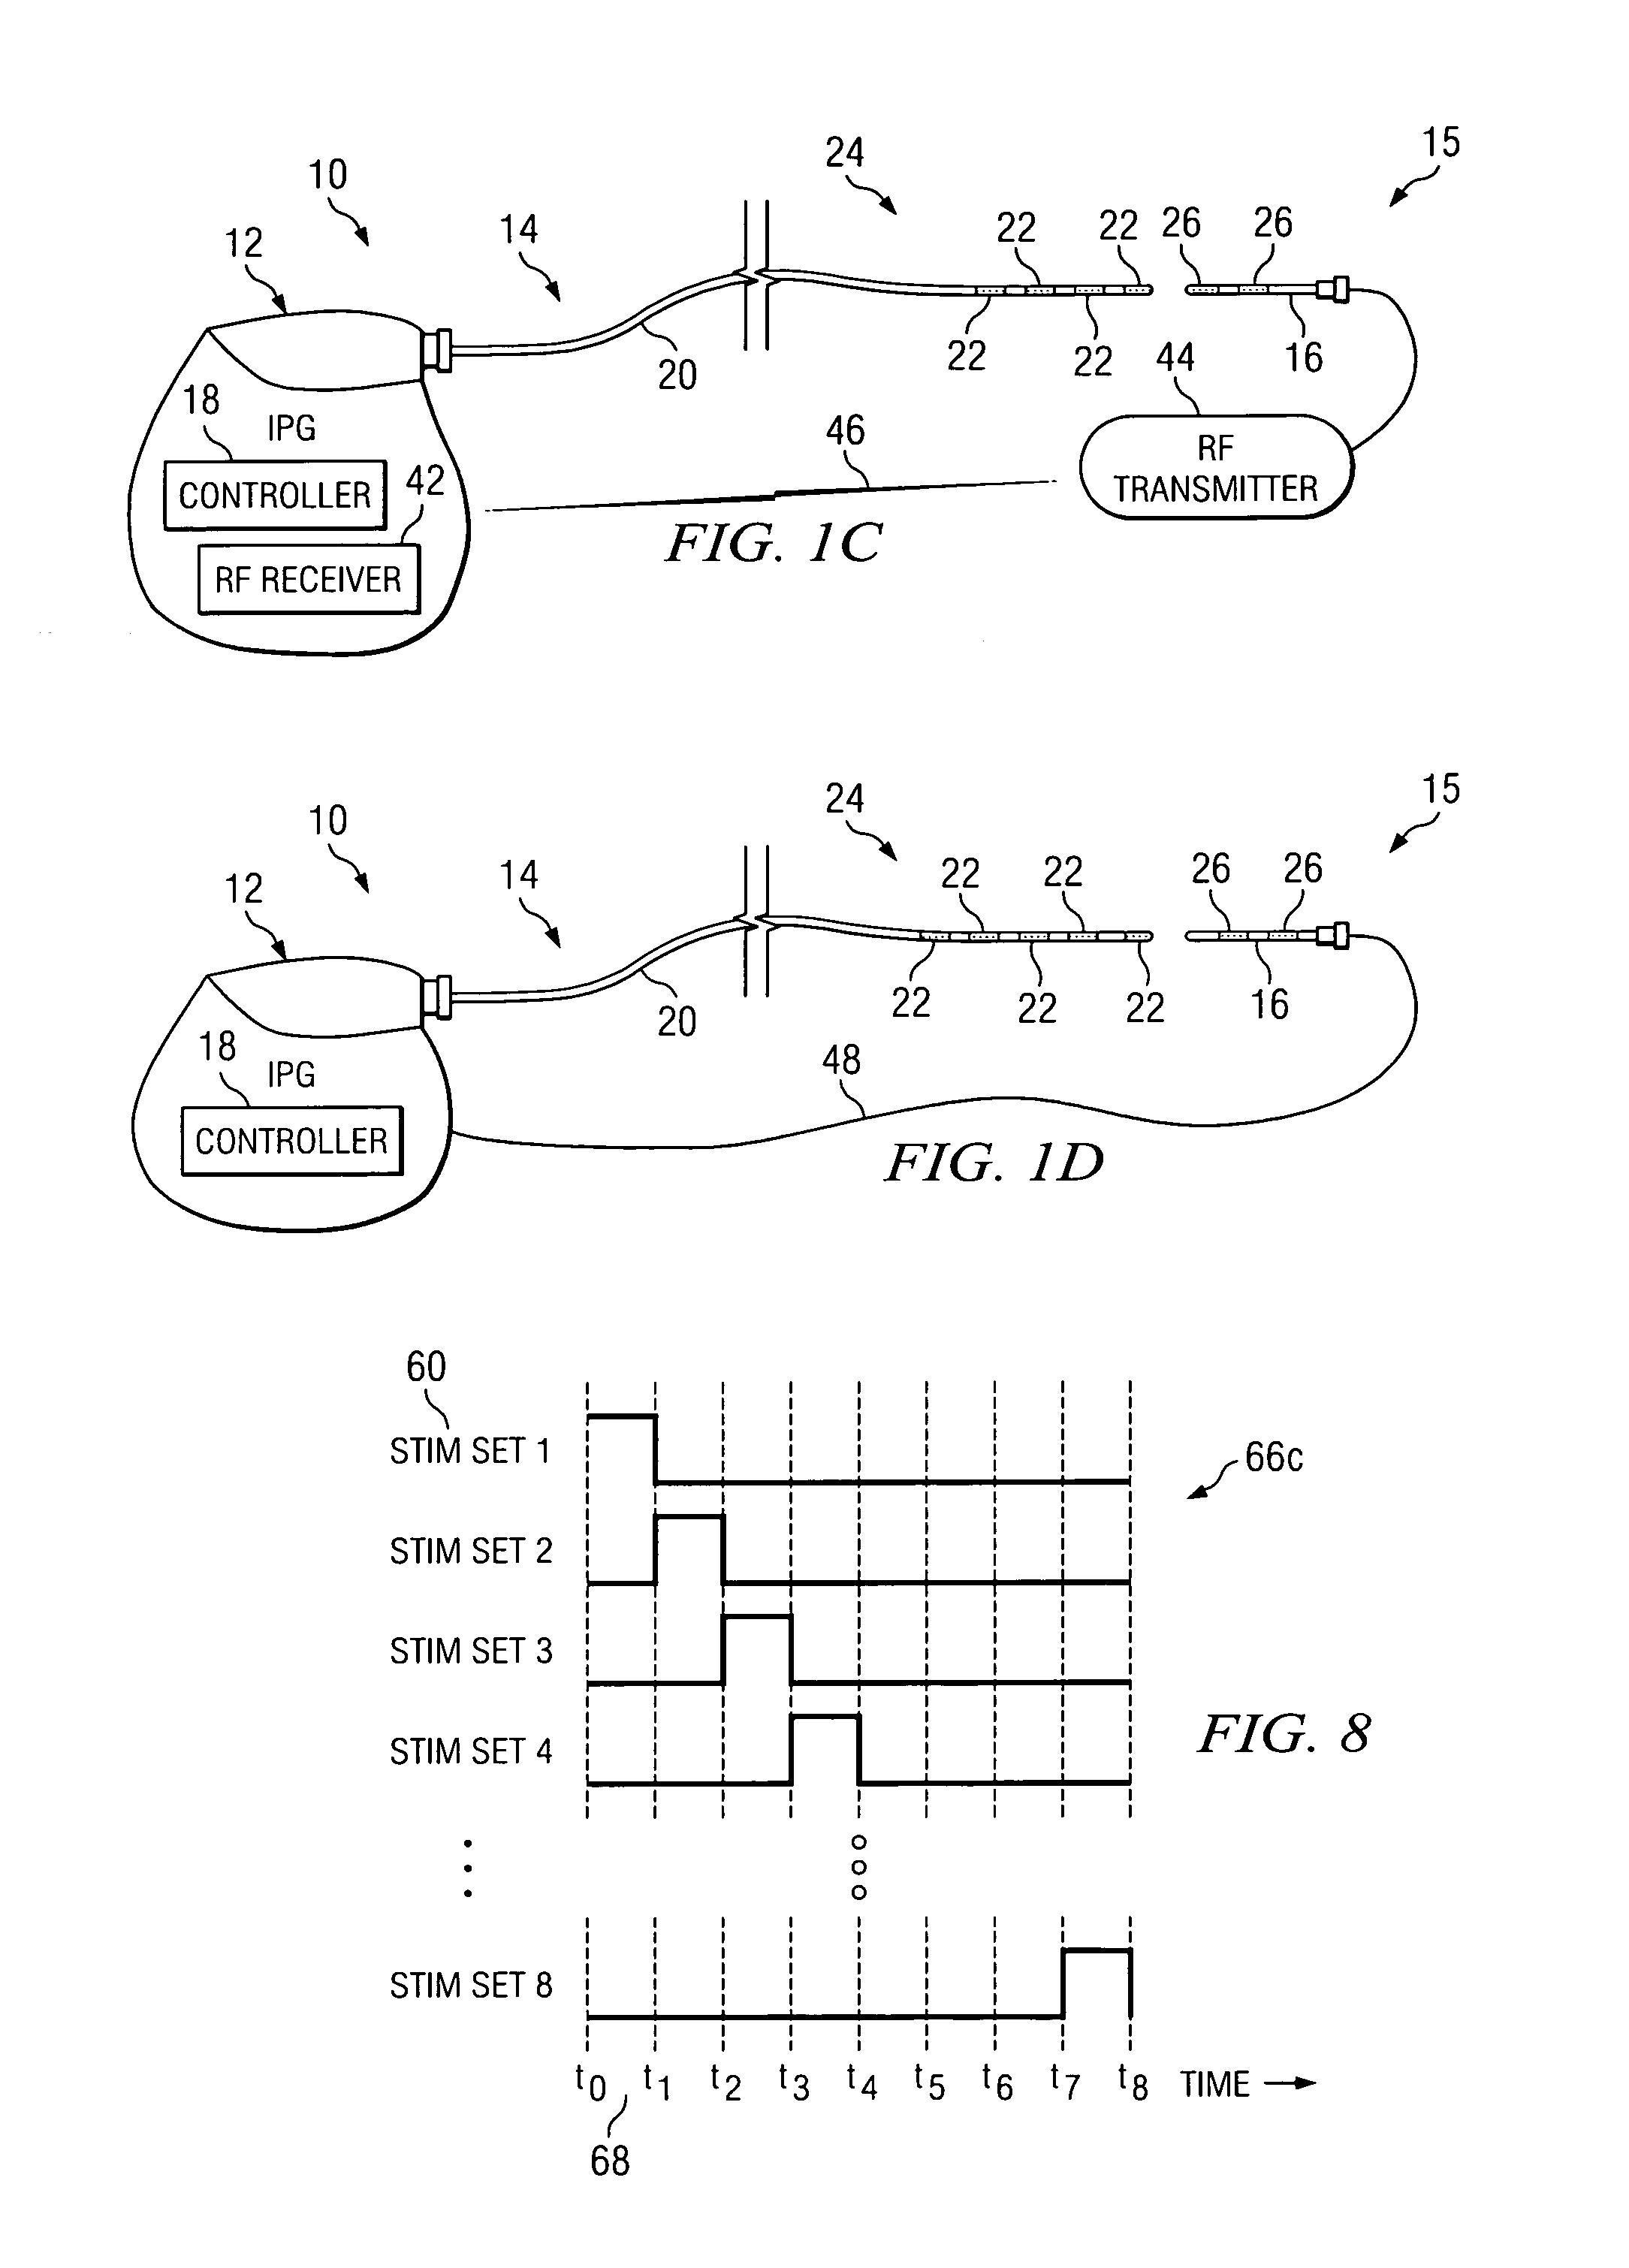 Method for controlling or regulating therapeutic nerve stimulation using electrical feedback